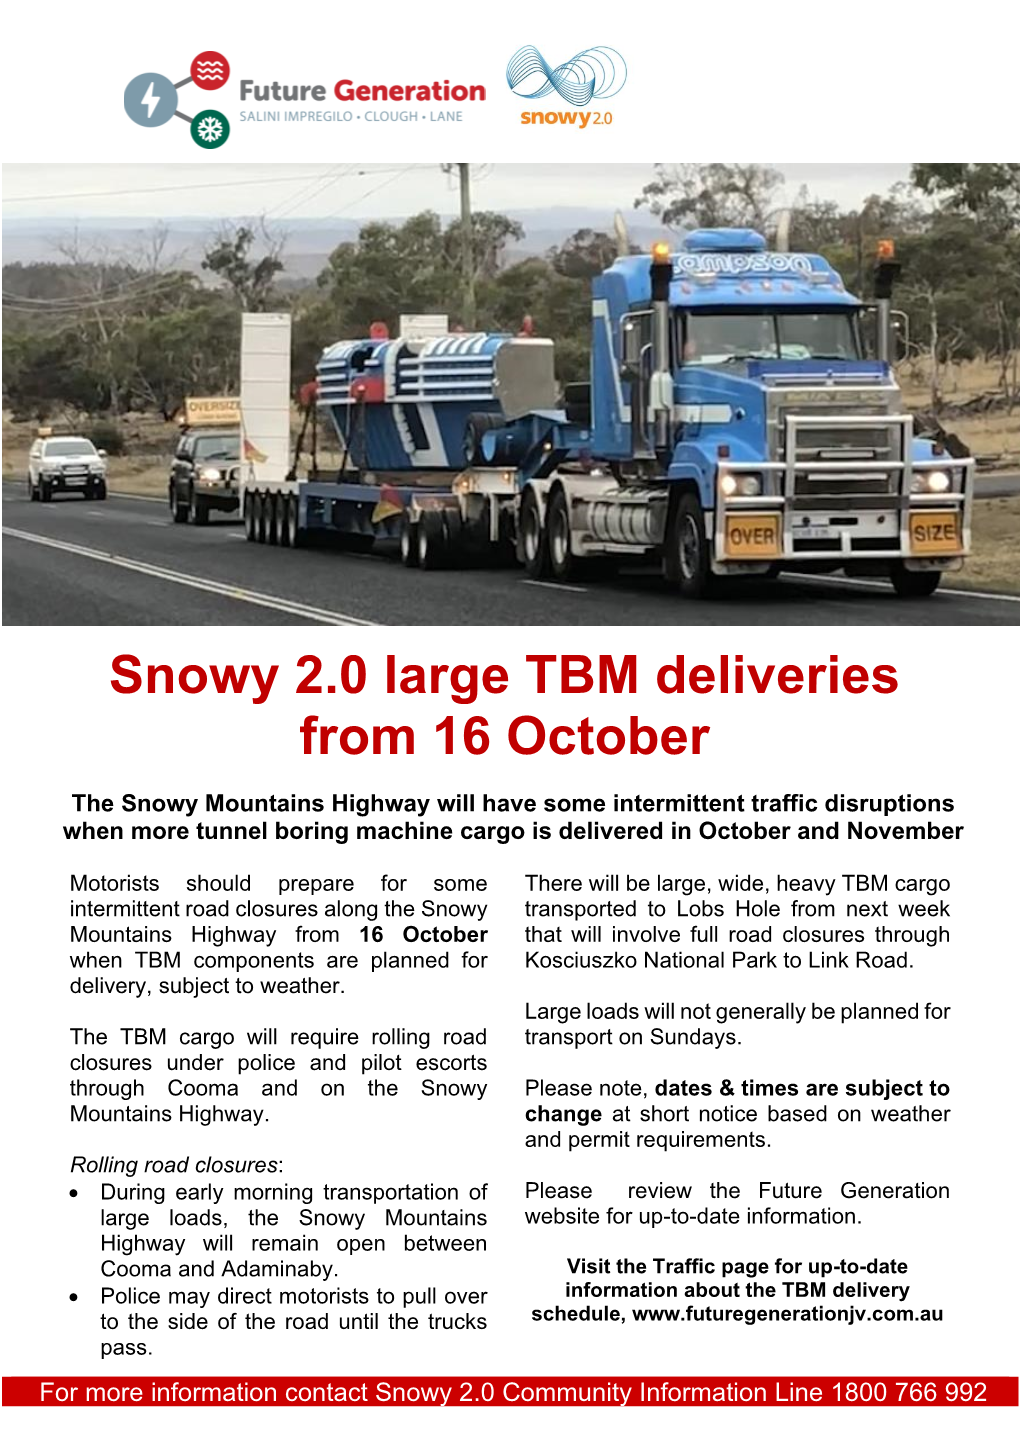 Snowy 2.0 Large TBM Deliveries from 16 October (Plus Schedule for Week